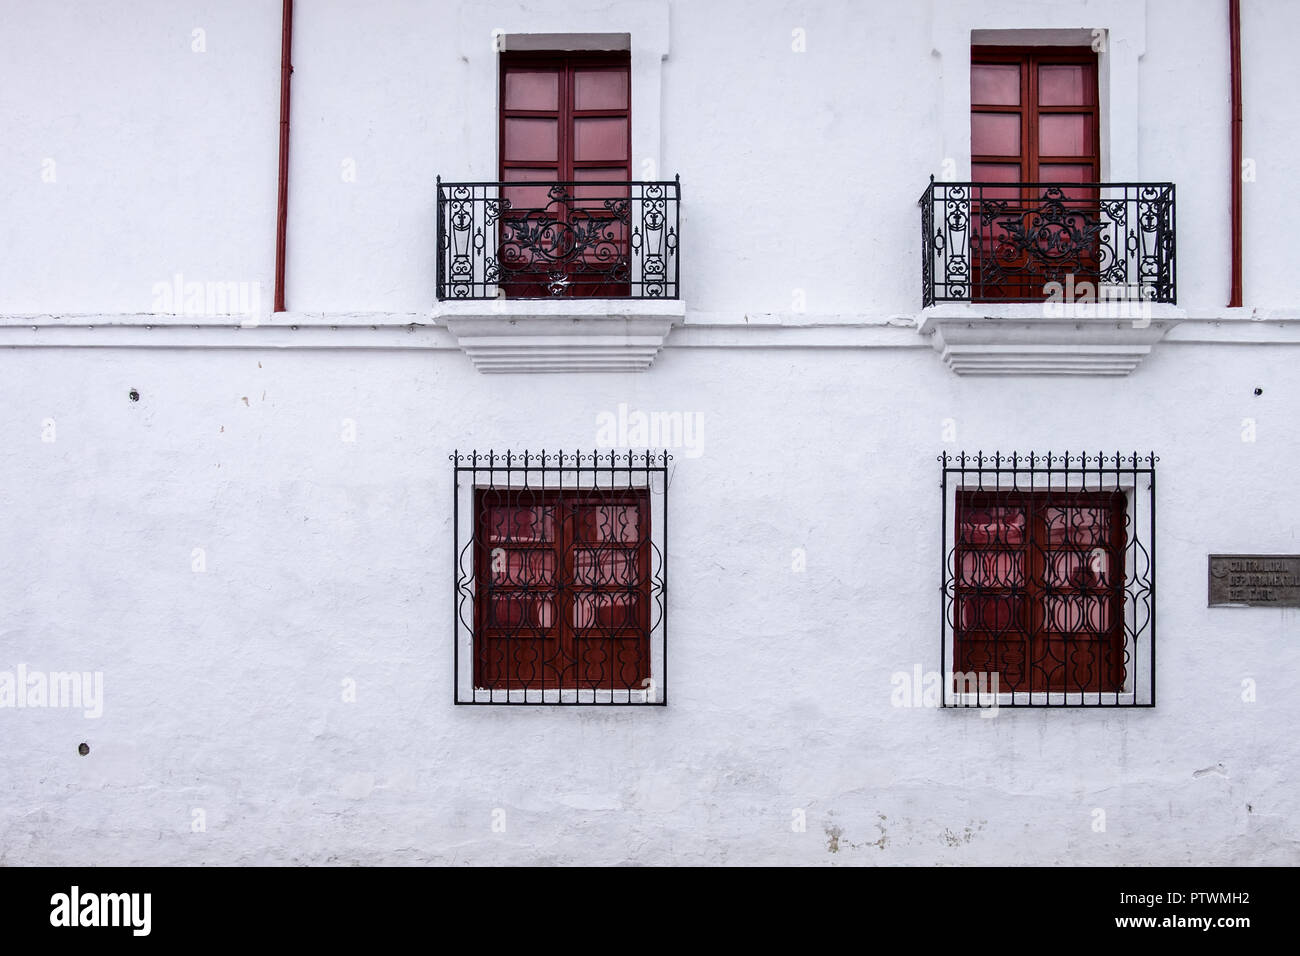 WHITE WALLS AND WINDOWS - POPAYAN - COLOMBIA Stock Photo